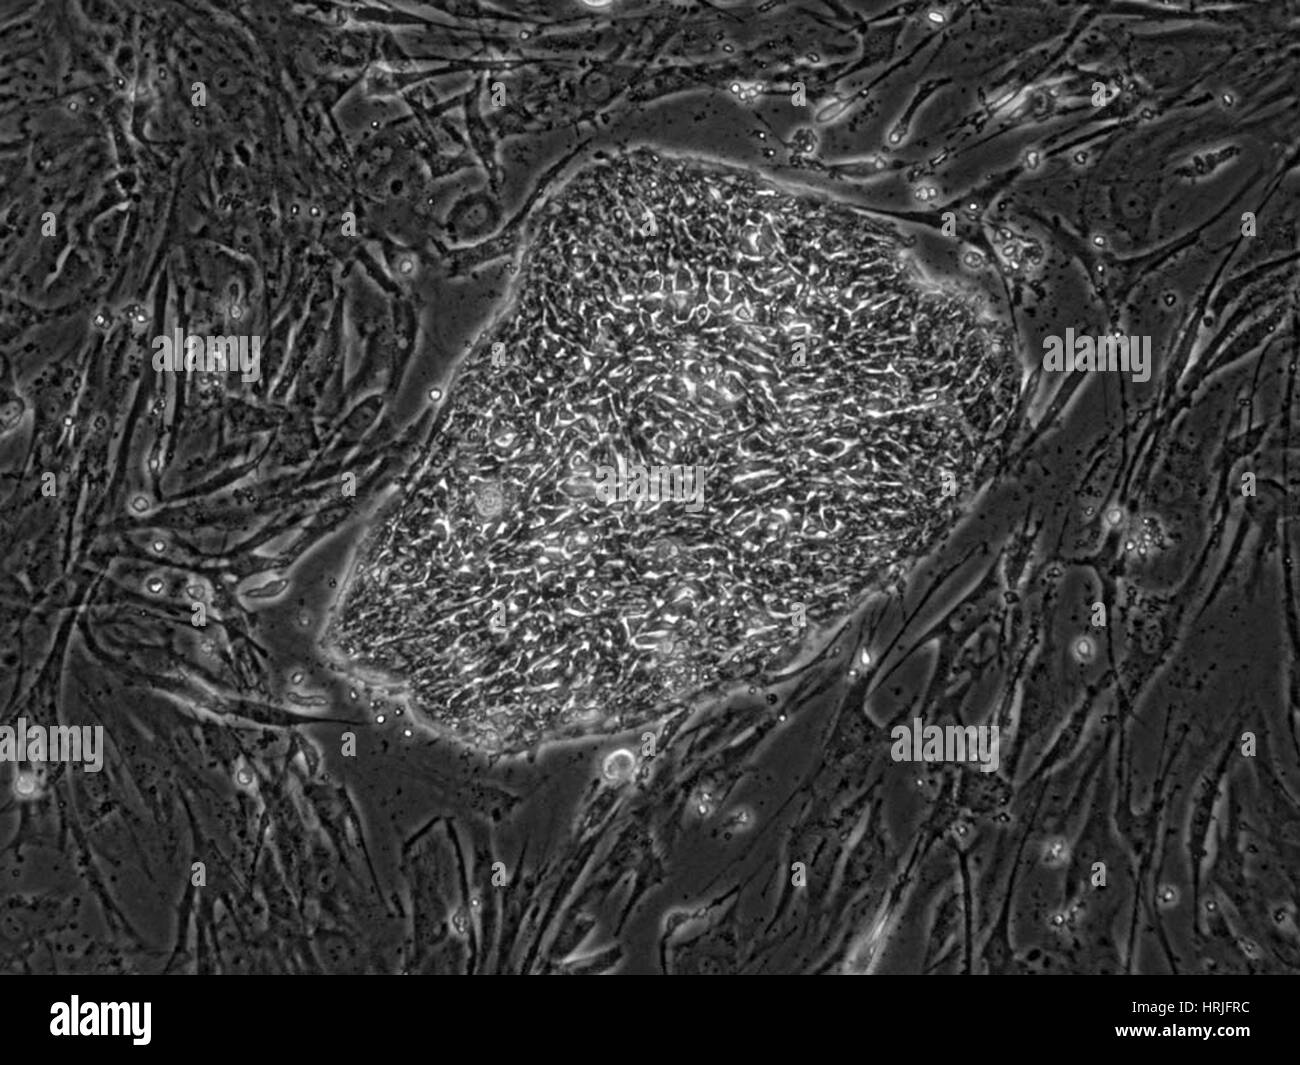 Human Embryonic Stem Cell Line ES02 Stock Photo